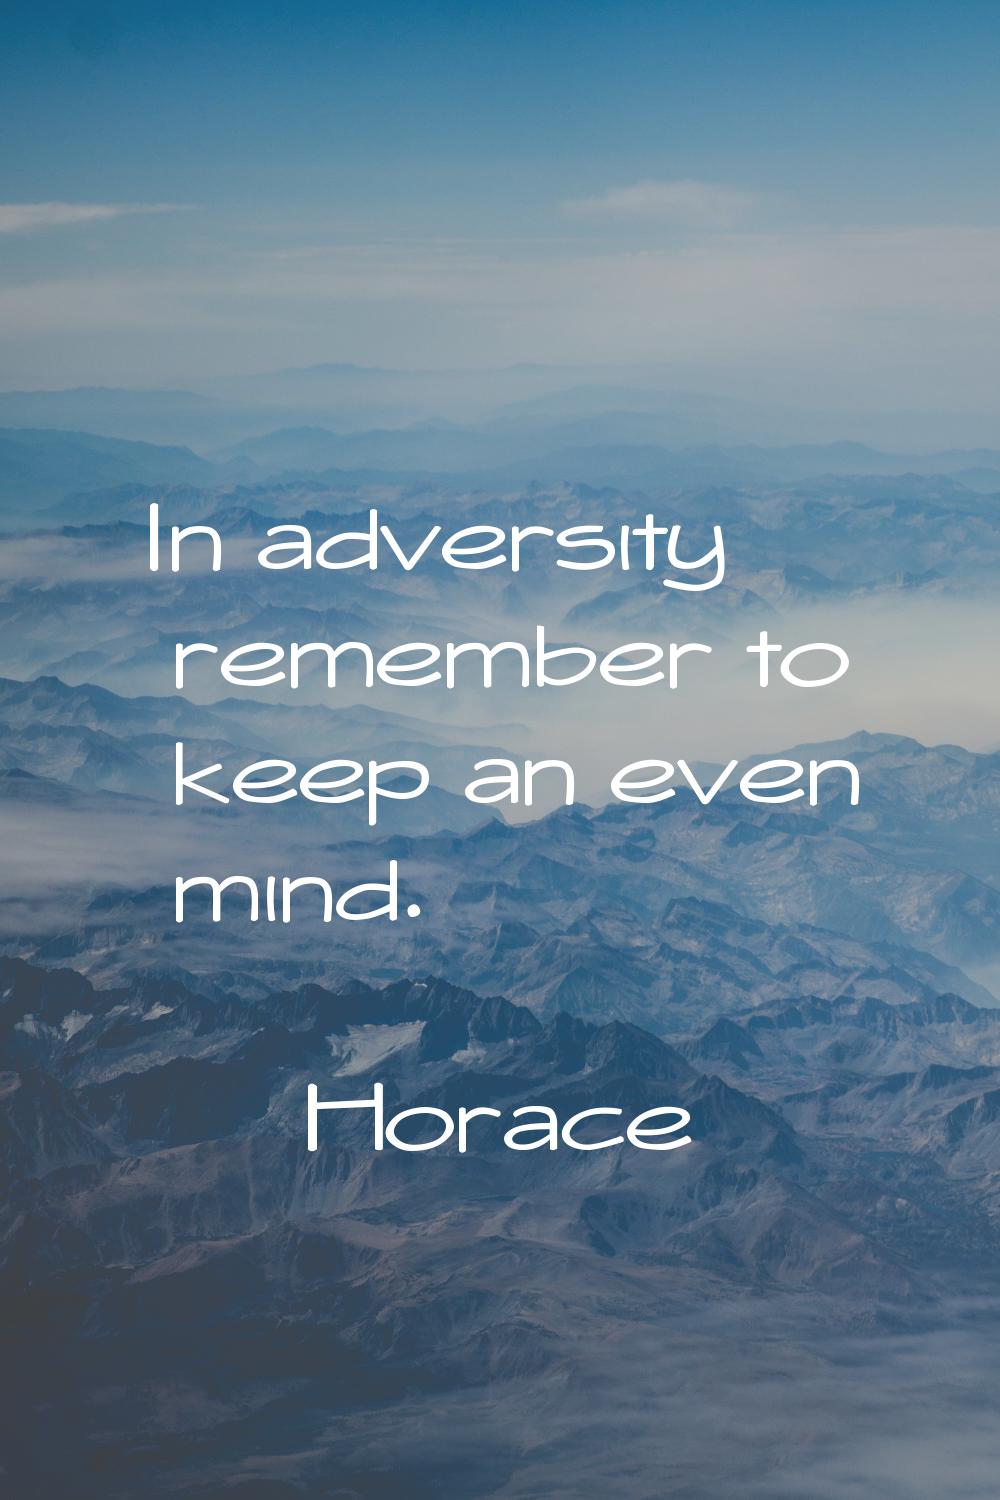 In adversity remember to keep an even mind.